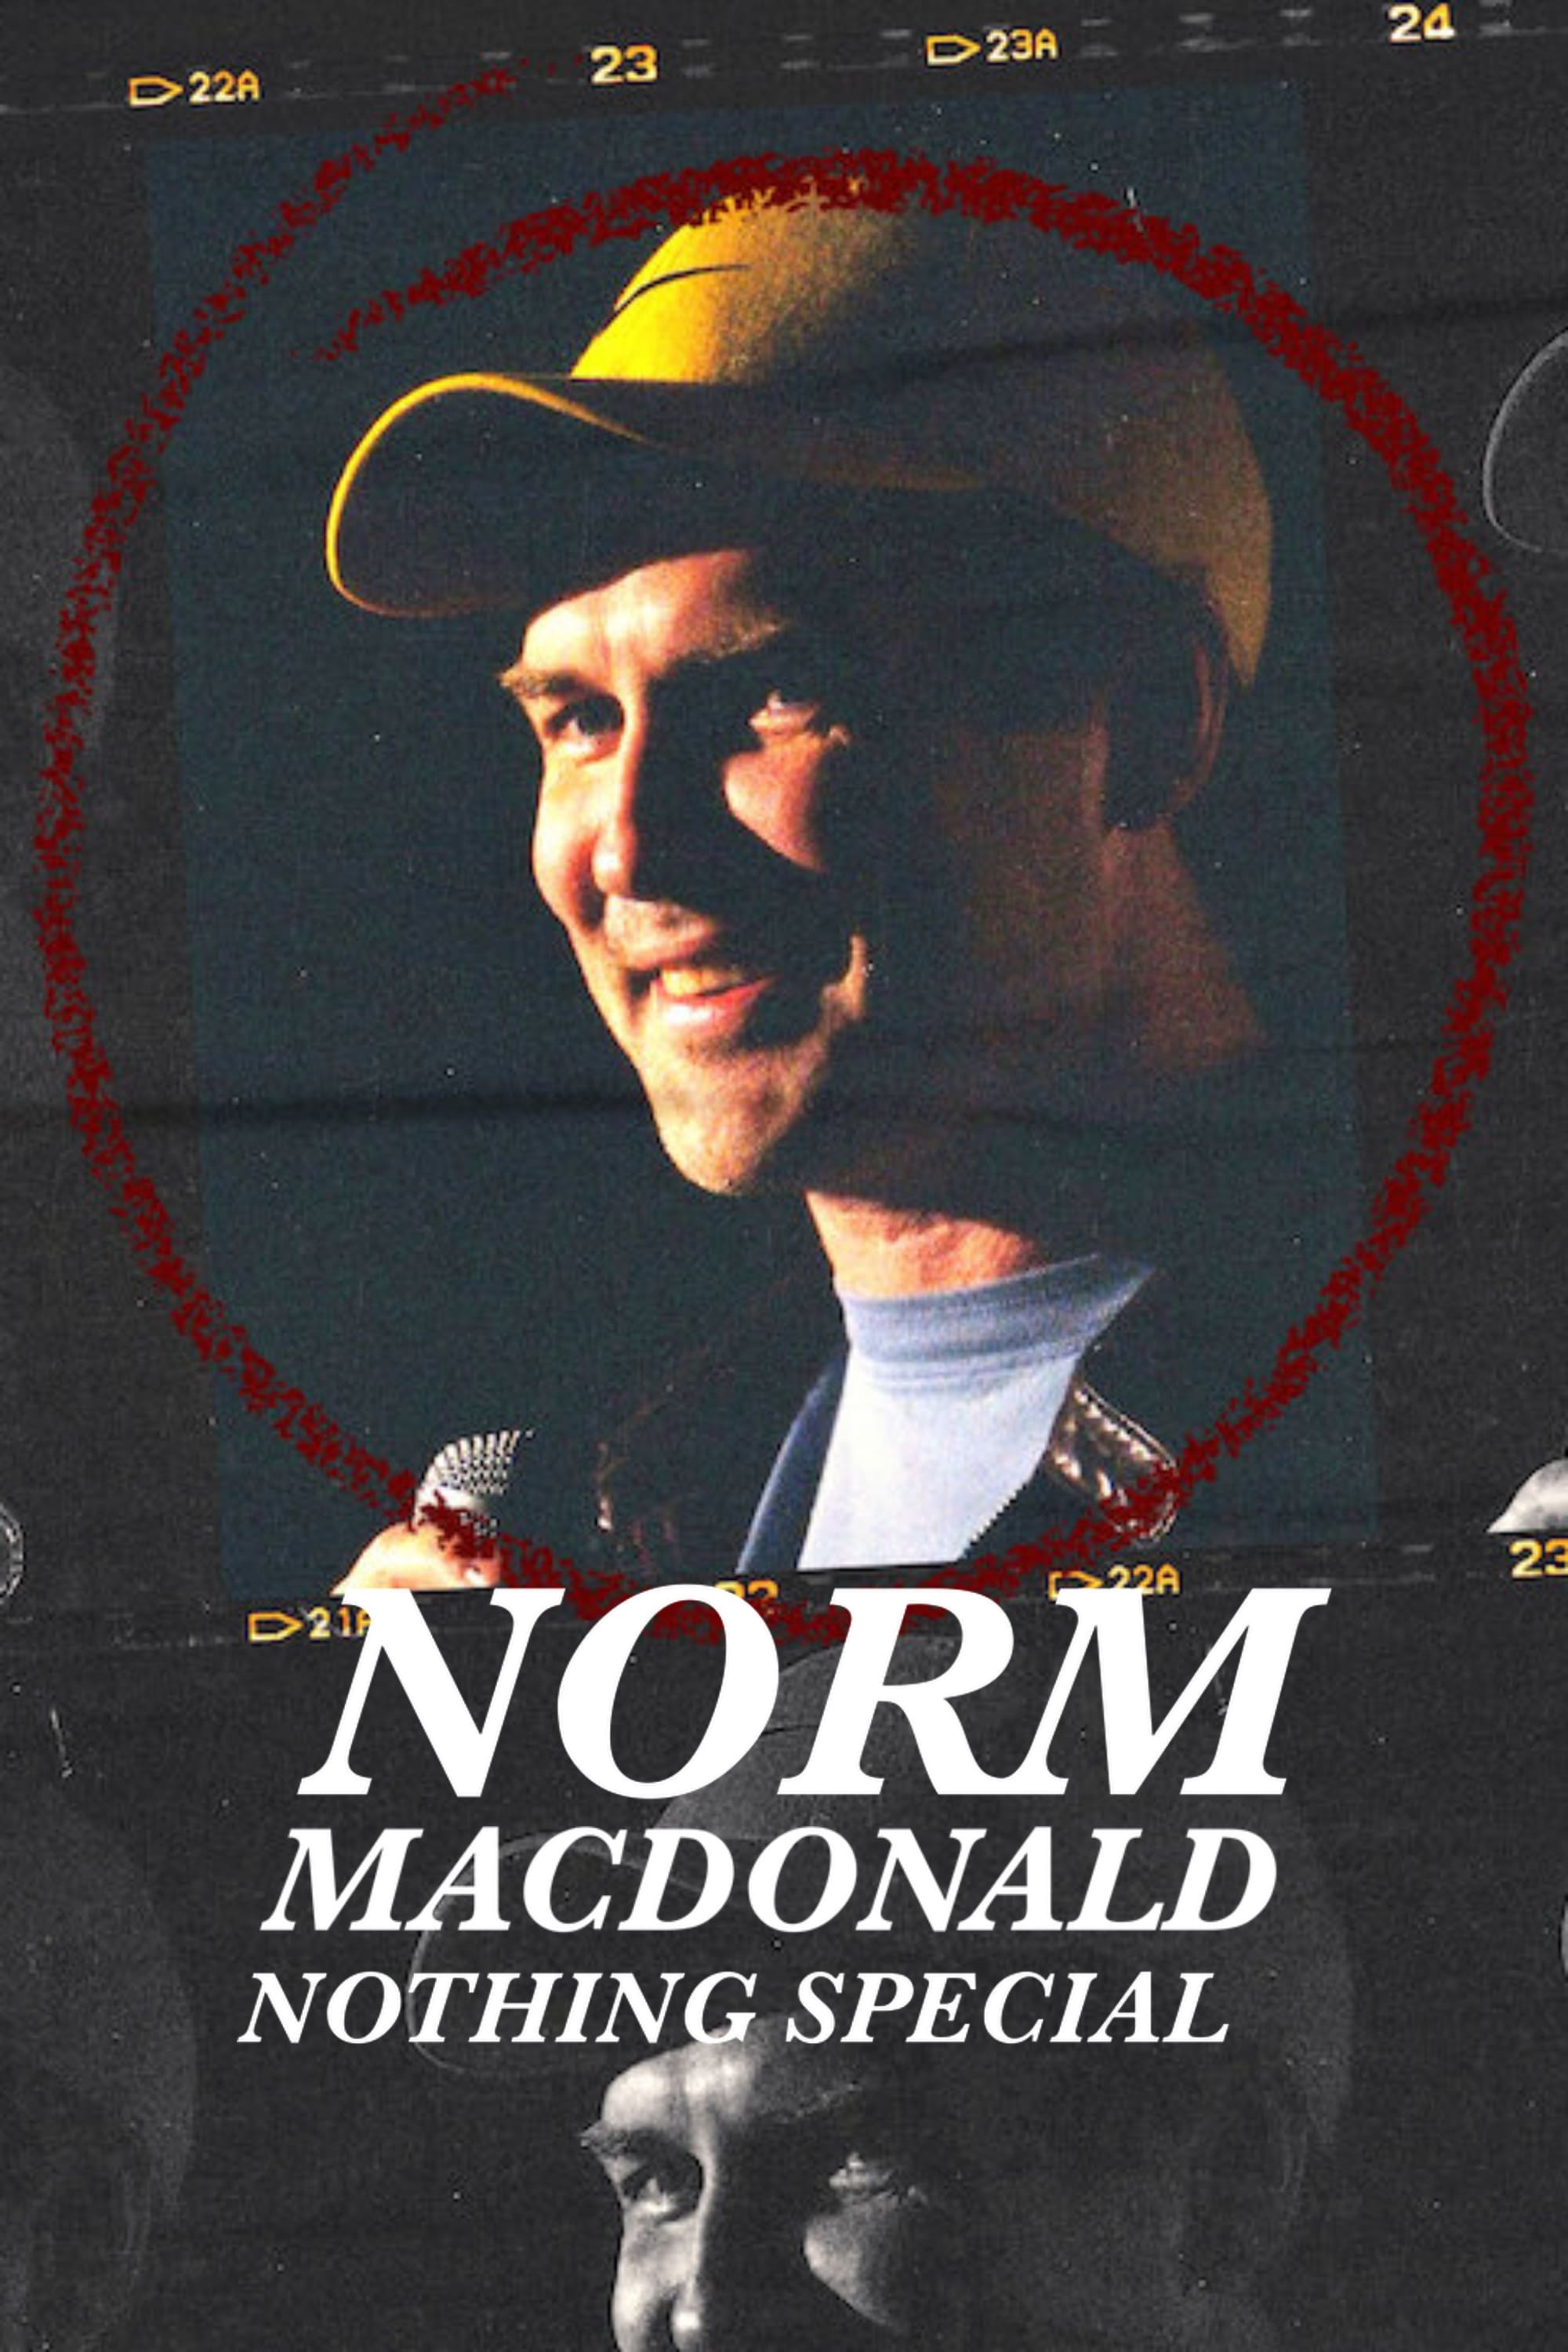 Norm Macdonald: Nothing Special film